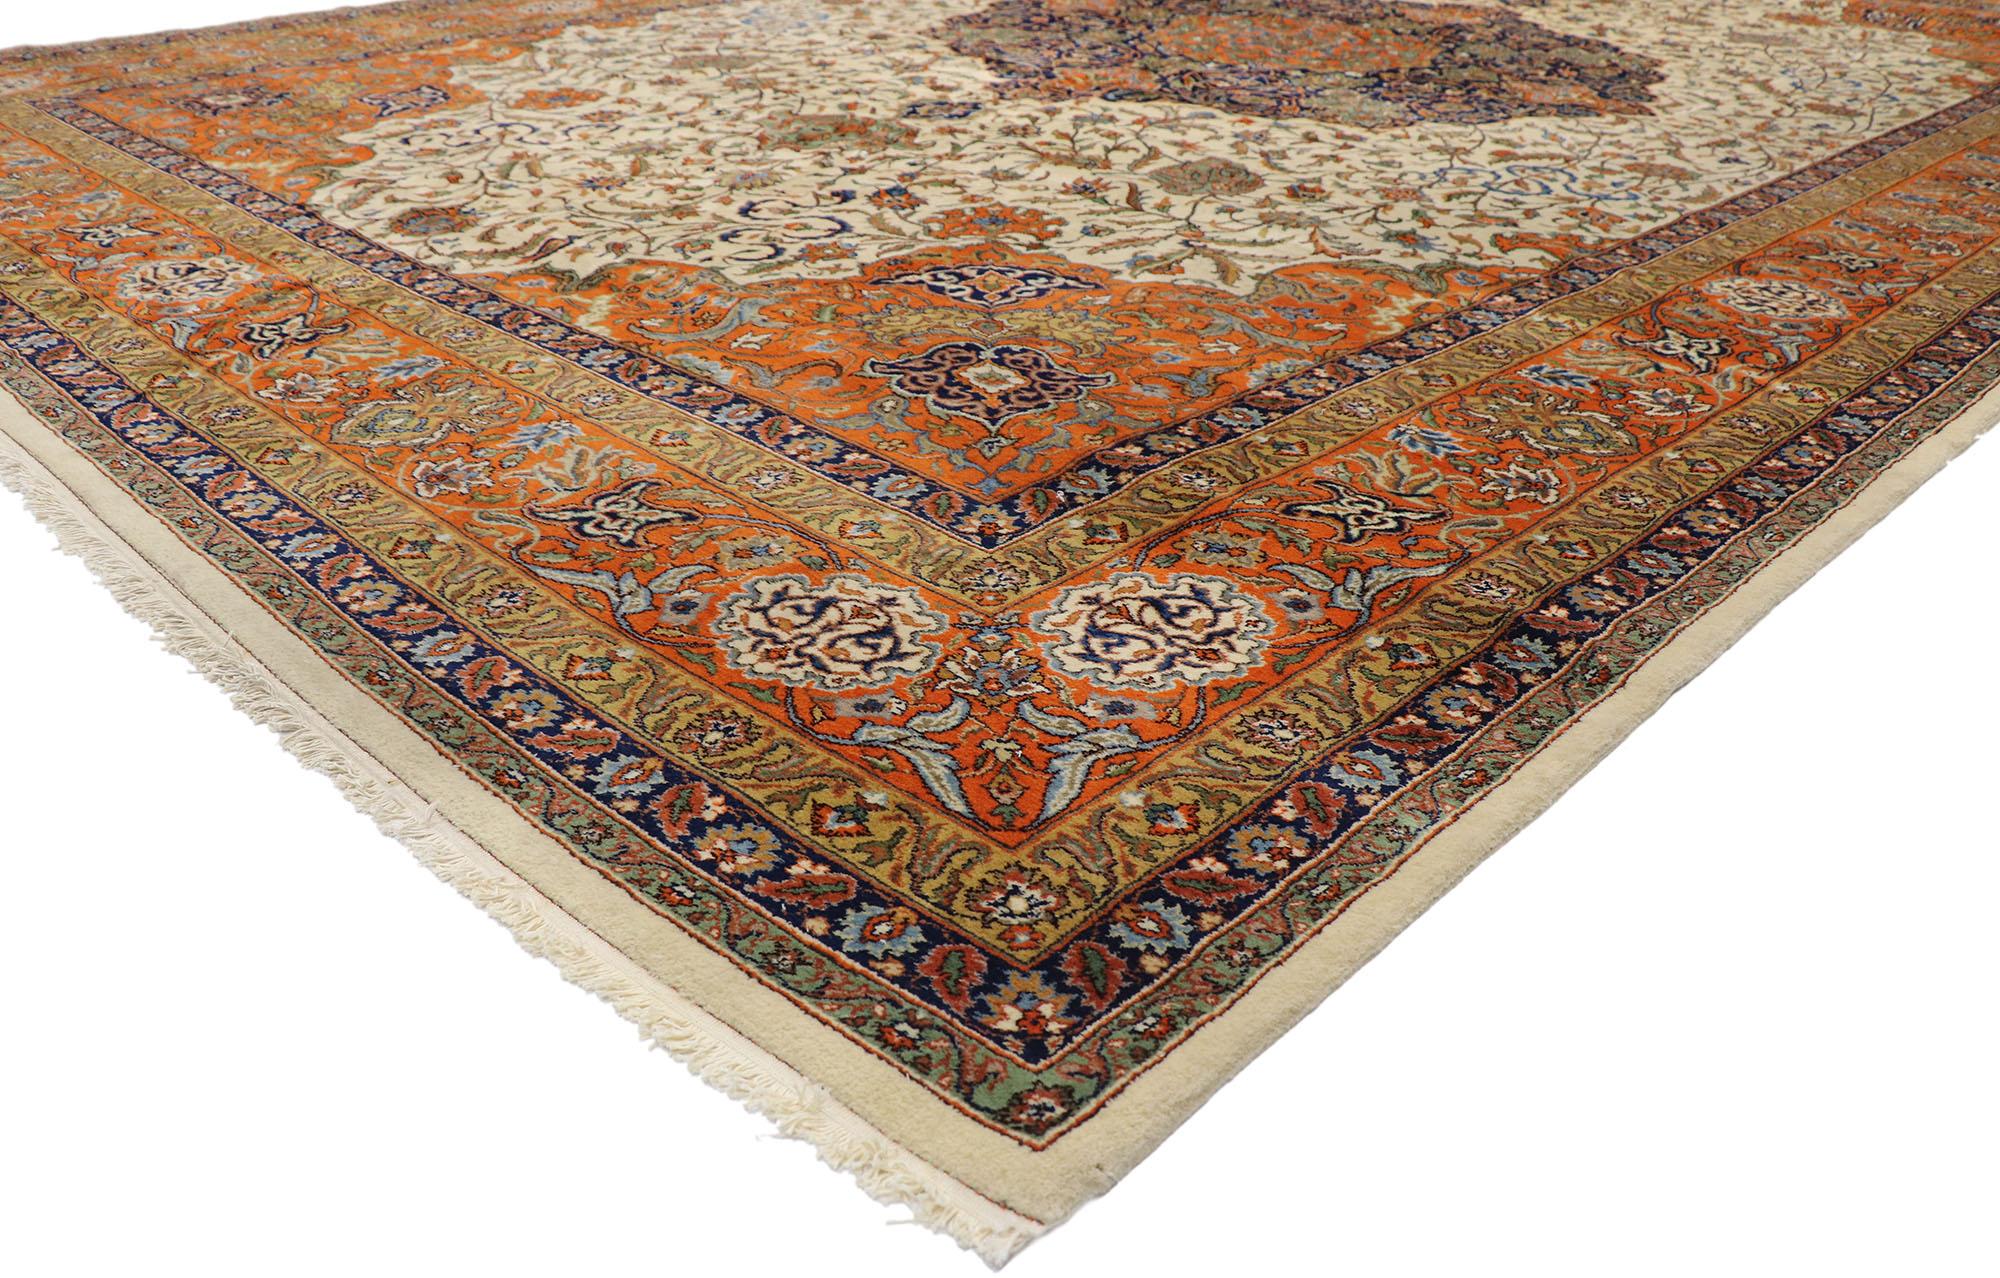 76657, vintage Romanian Palace size rug with old world Art Nouveau cottage style. With architectural elements of curved arabesque forms and decorative detailing, this hand knotted wool vintage Romanian palace size rug embodies a combination of Old